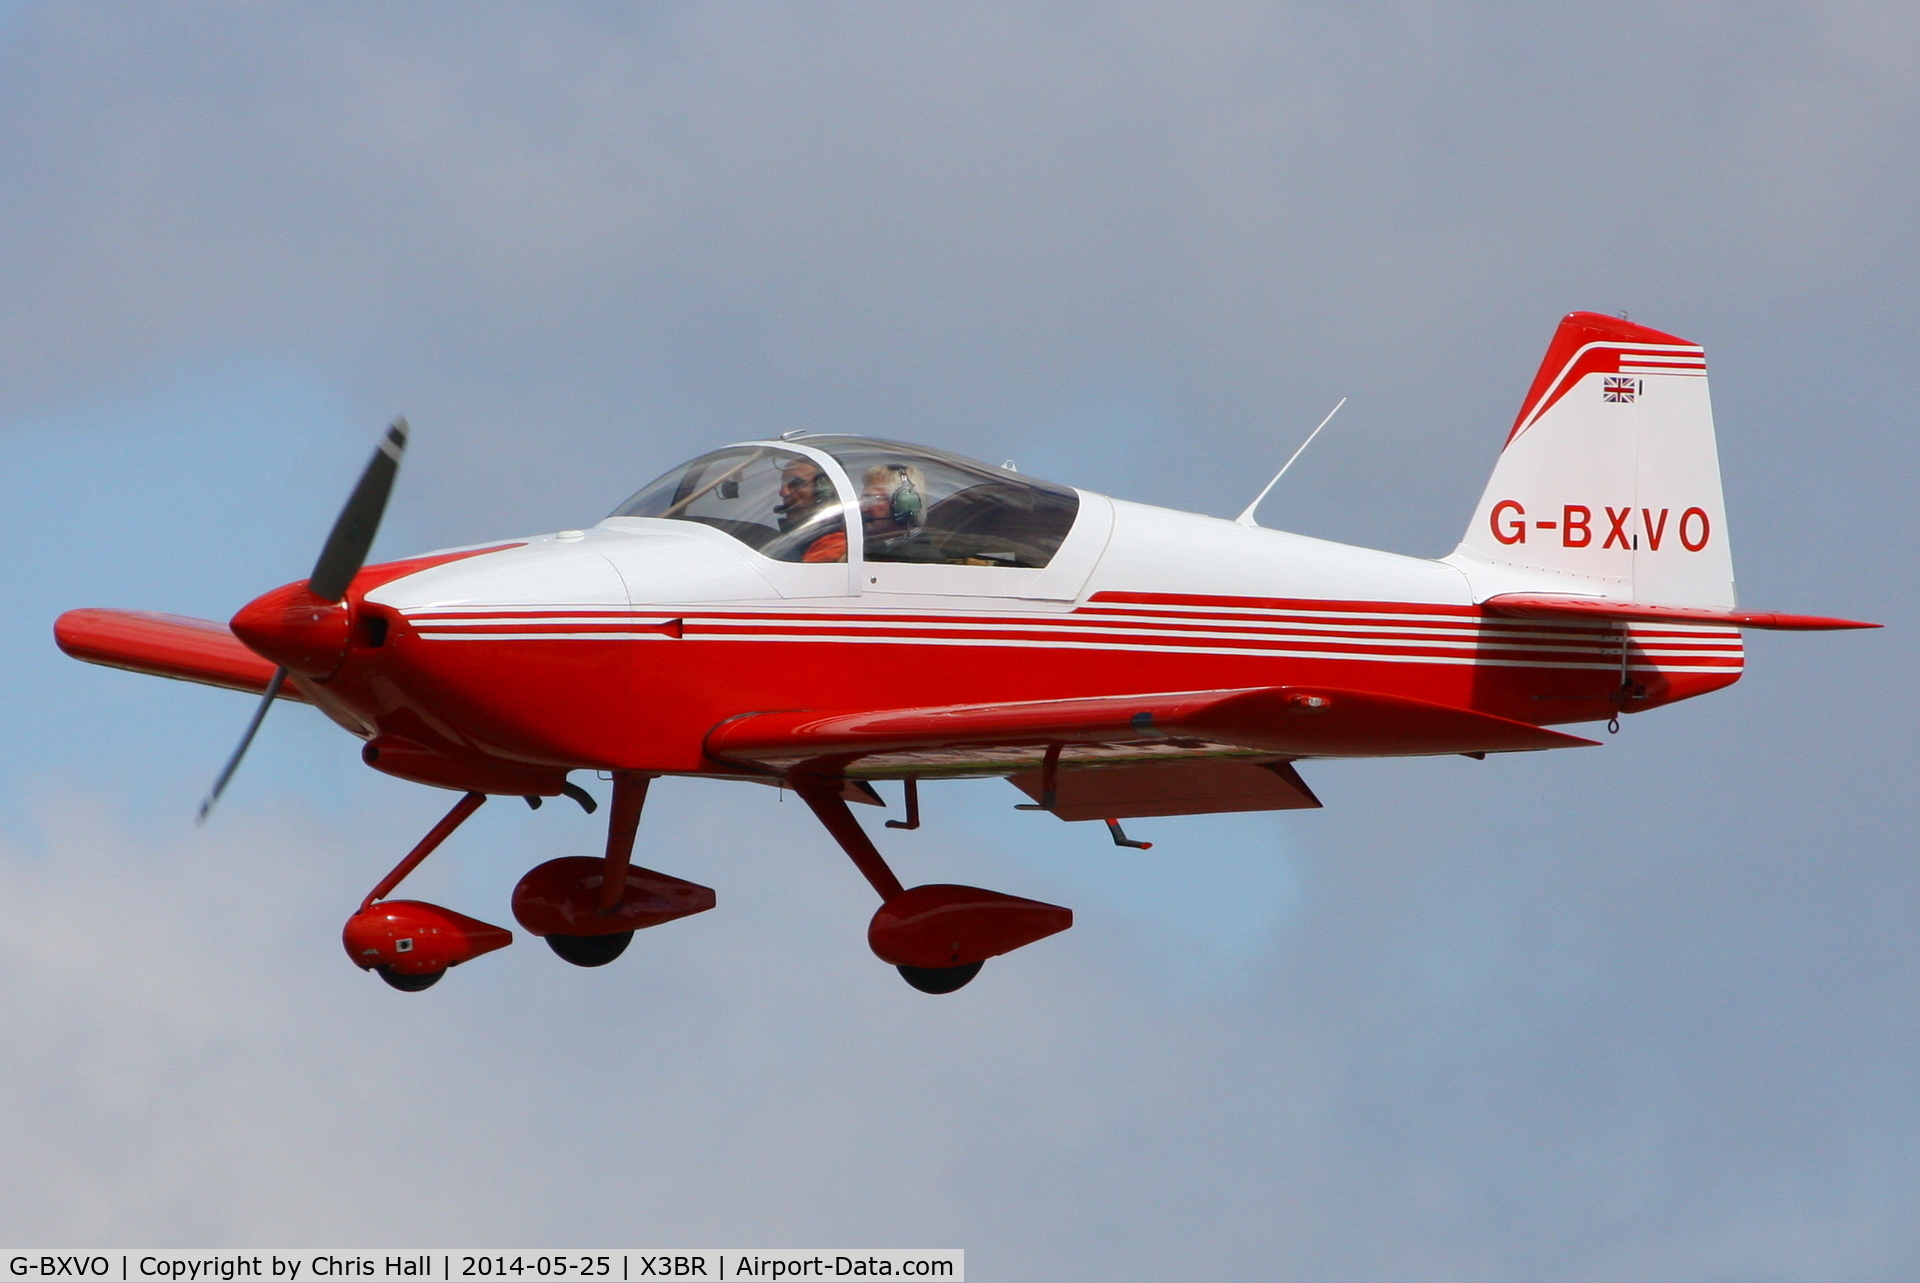 G-BXVO, 1999 Vans RV-6A C/N PFA 181-12575, visitor at the Cold War Jets Open Day 2014